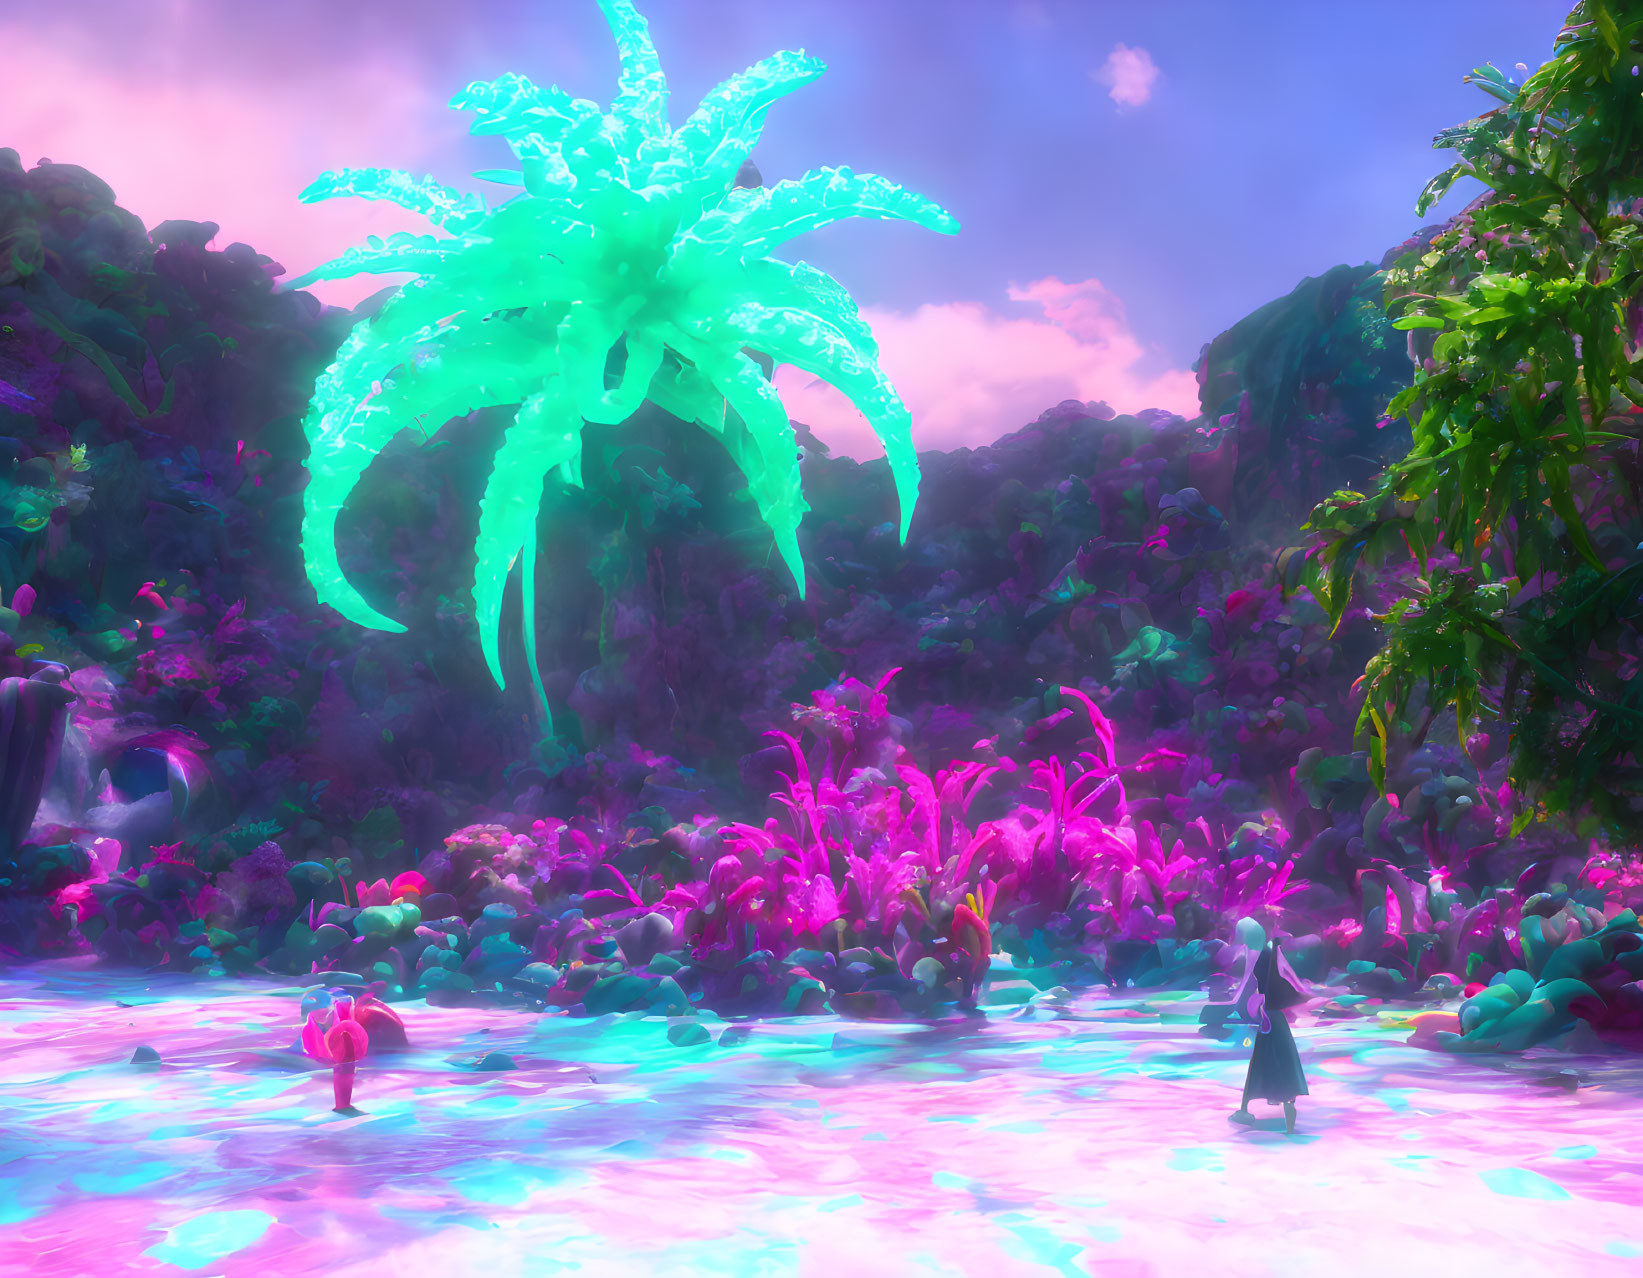 Colorful fantasy landscape with neon flora, turquoise tree, pink water, and figure in black attire